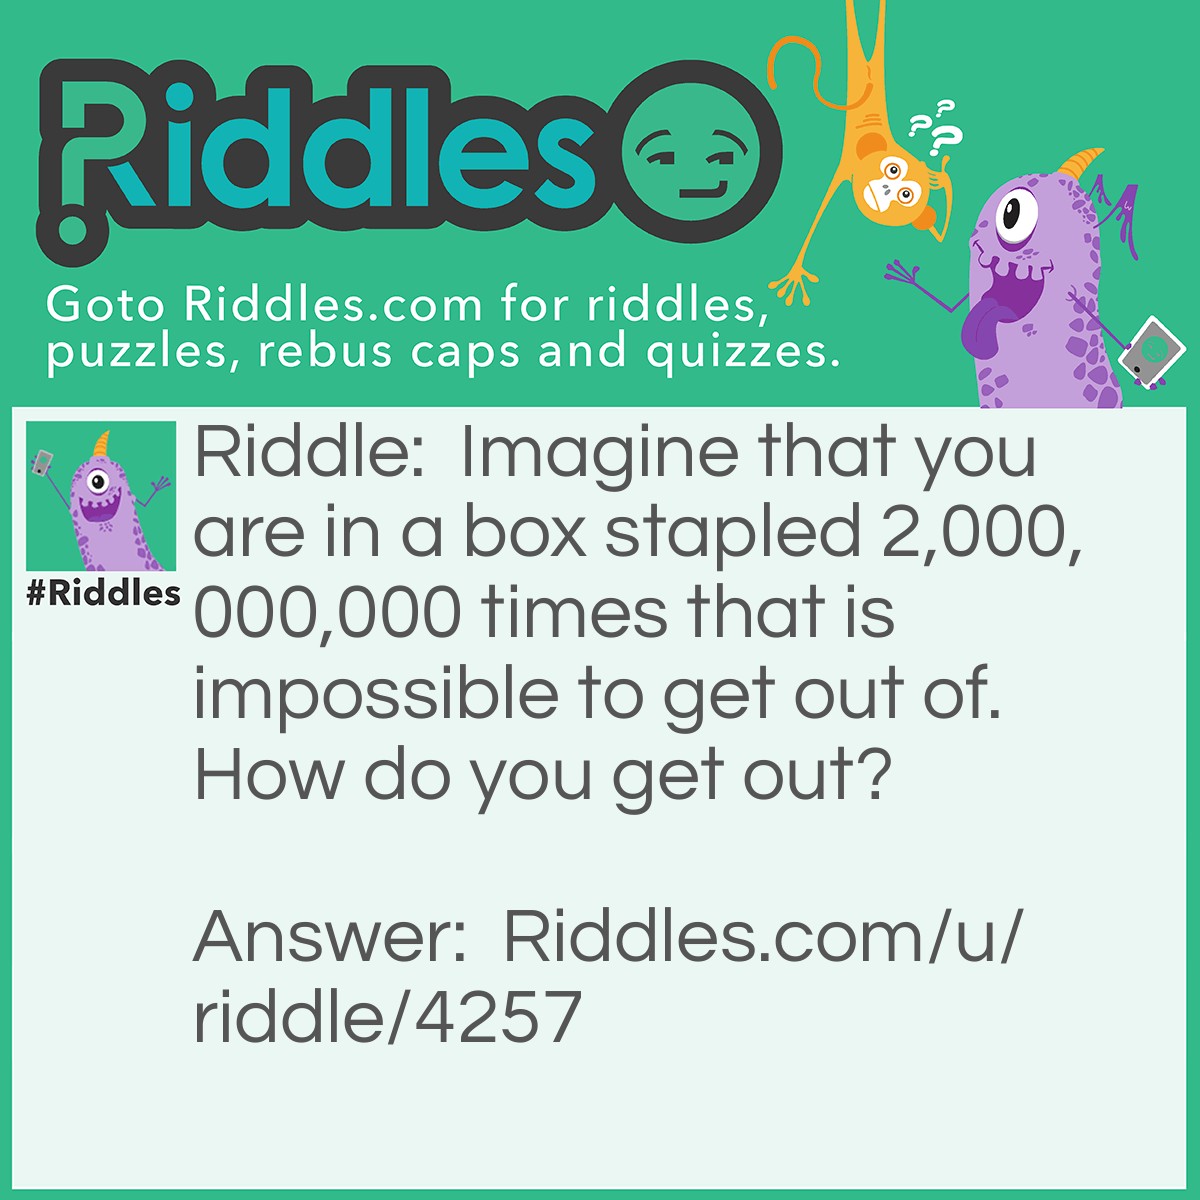 Riddle: Imagine that you are in a box stapled 2,000,000,000 times that is impossible to get out of. How do you get out? Answer: Stop imagining!